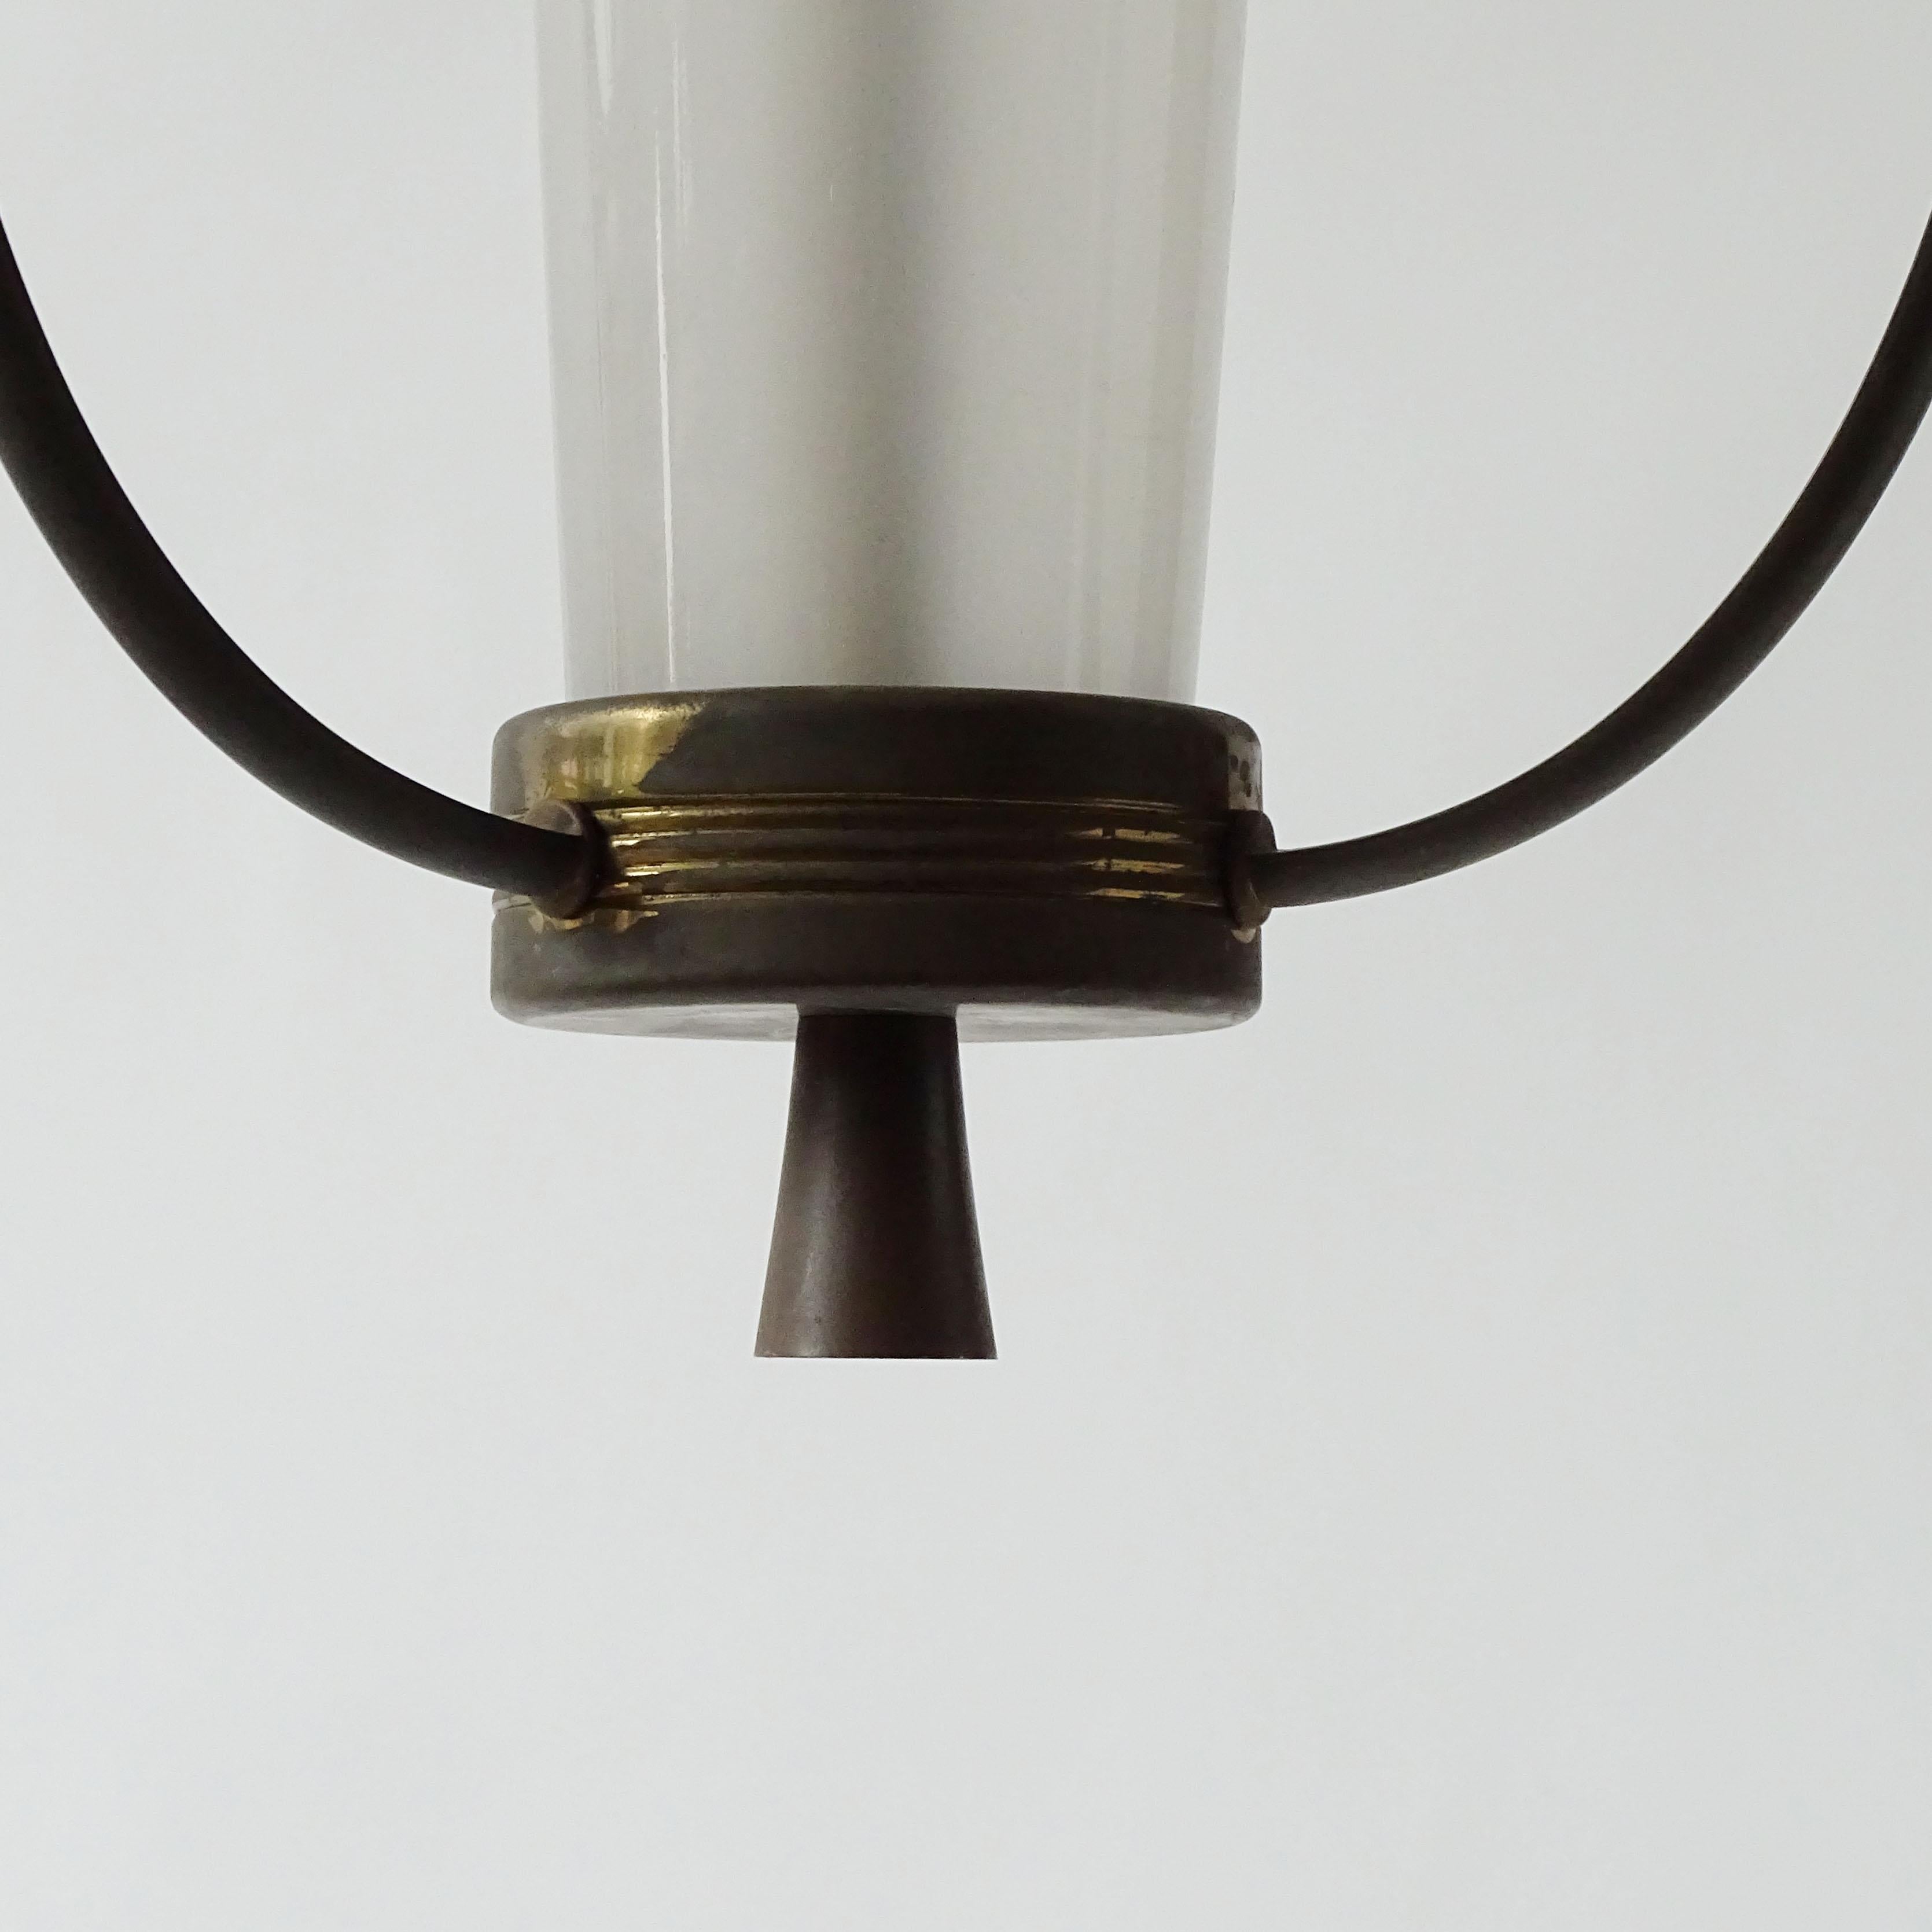 Monumental Guglielmo Ulrich Ceiling Lamp in Brass and Glass, Italy 1940s In Good Condition For Sale In Milan, IT